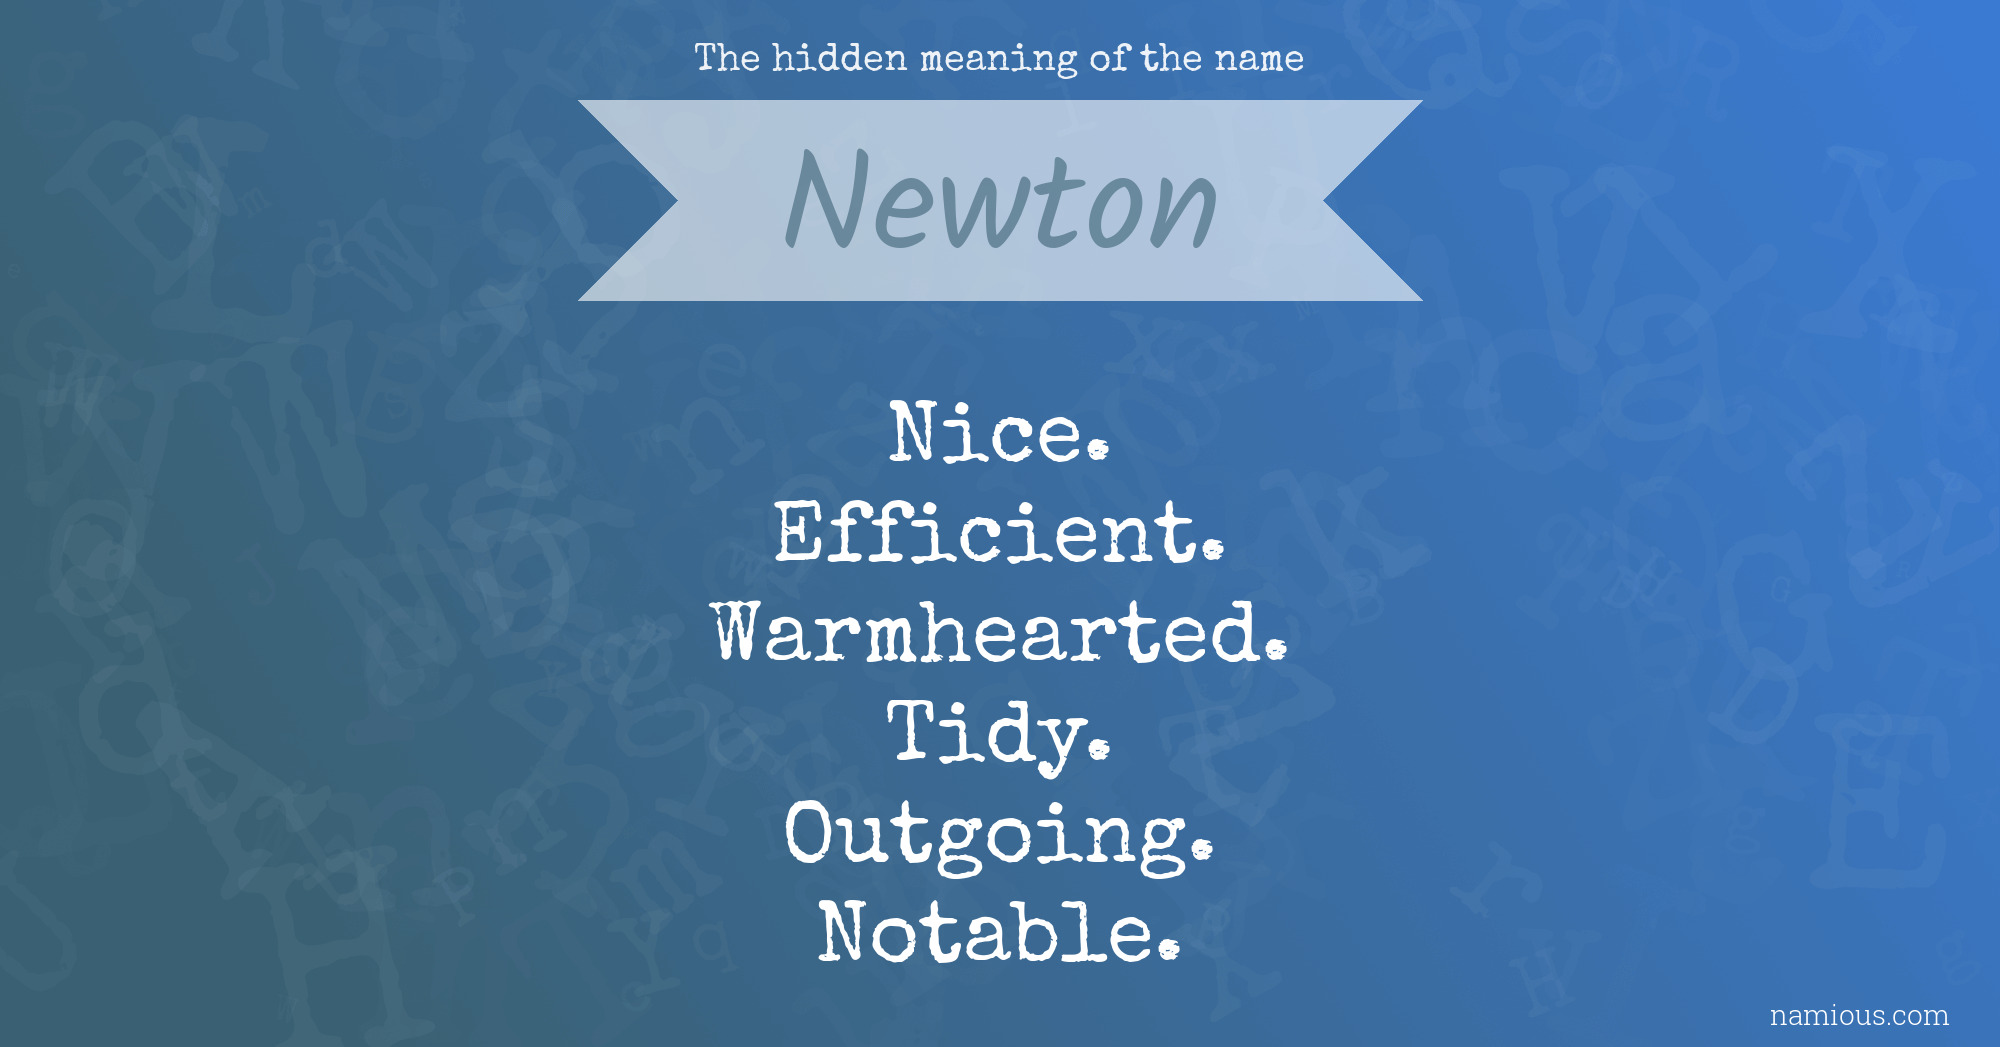 The hidden meaning of the name Newton